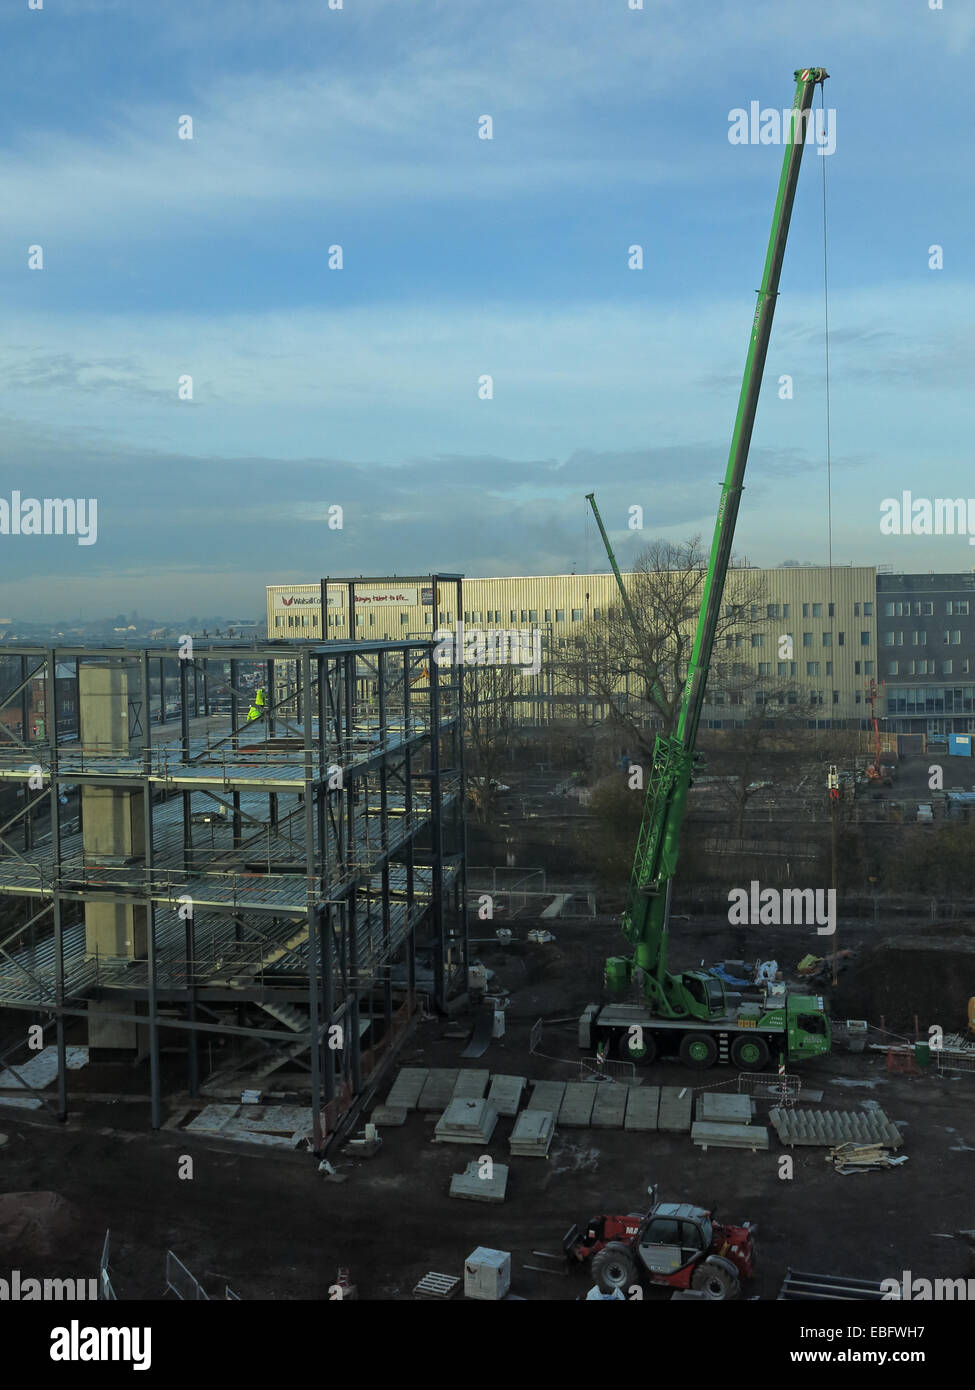 New head office being built in Walsall Gigaport, West Midlands for Jhoots pharmacy, England UK Stock Photo